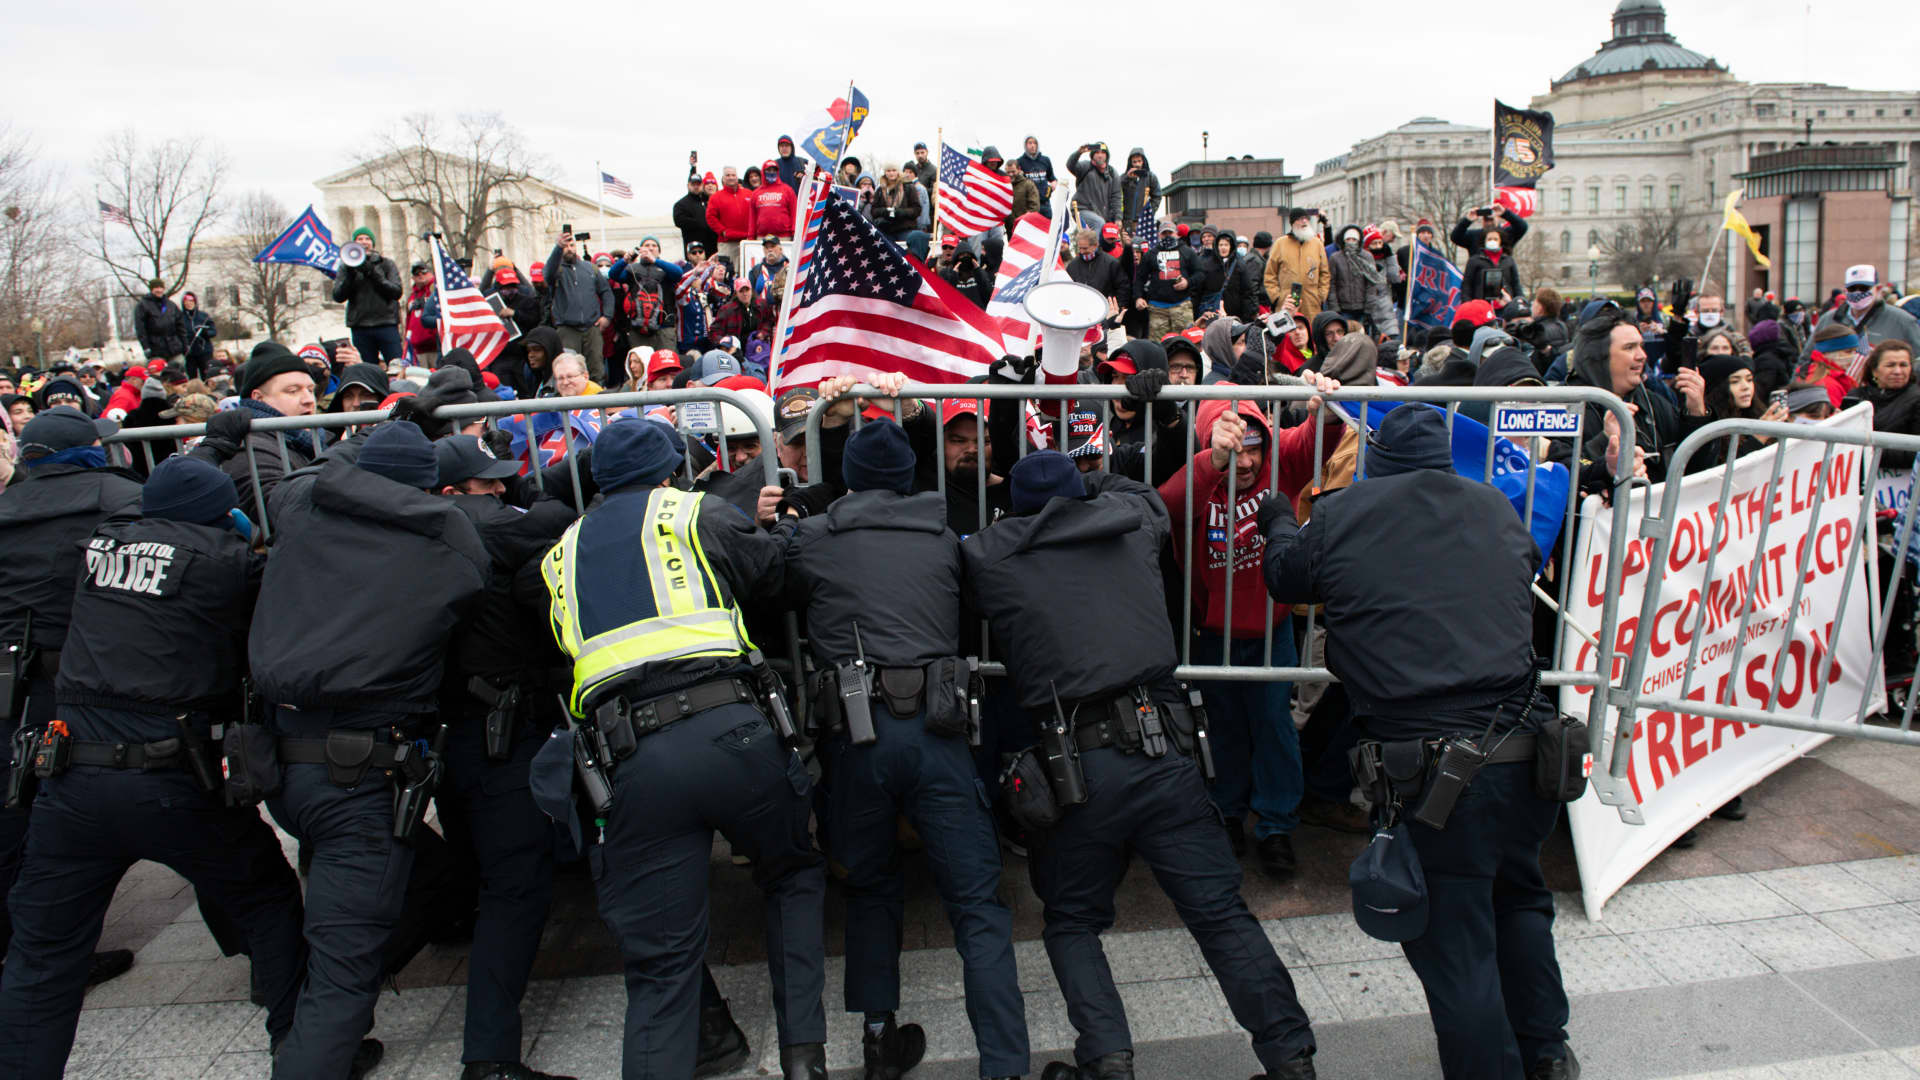 U.S. Capitol Police scuffle with demonstrators after they broke through security fencing outside of the U.S. Capitol building in Washington, D.C., U.S., on Wednesday, Jan. 6, 2021.